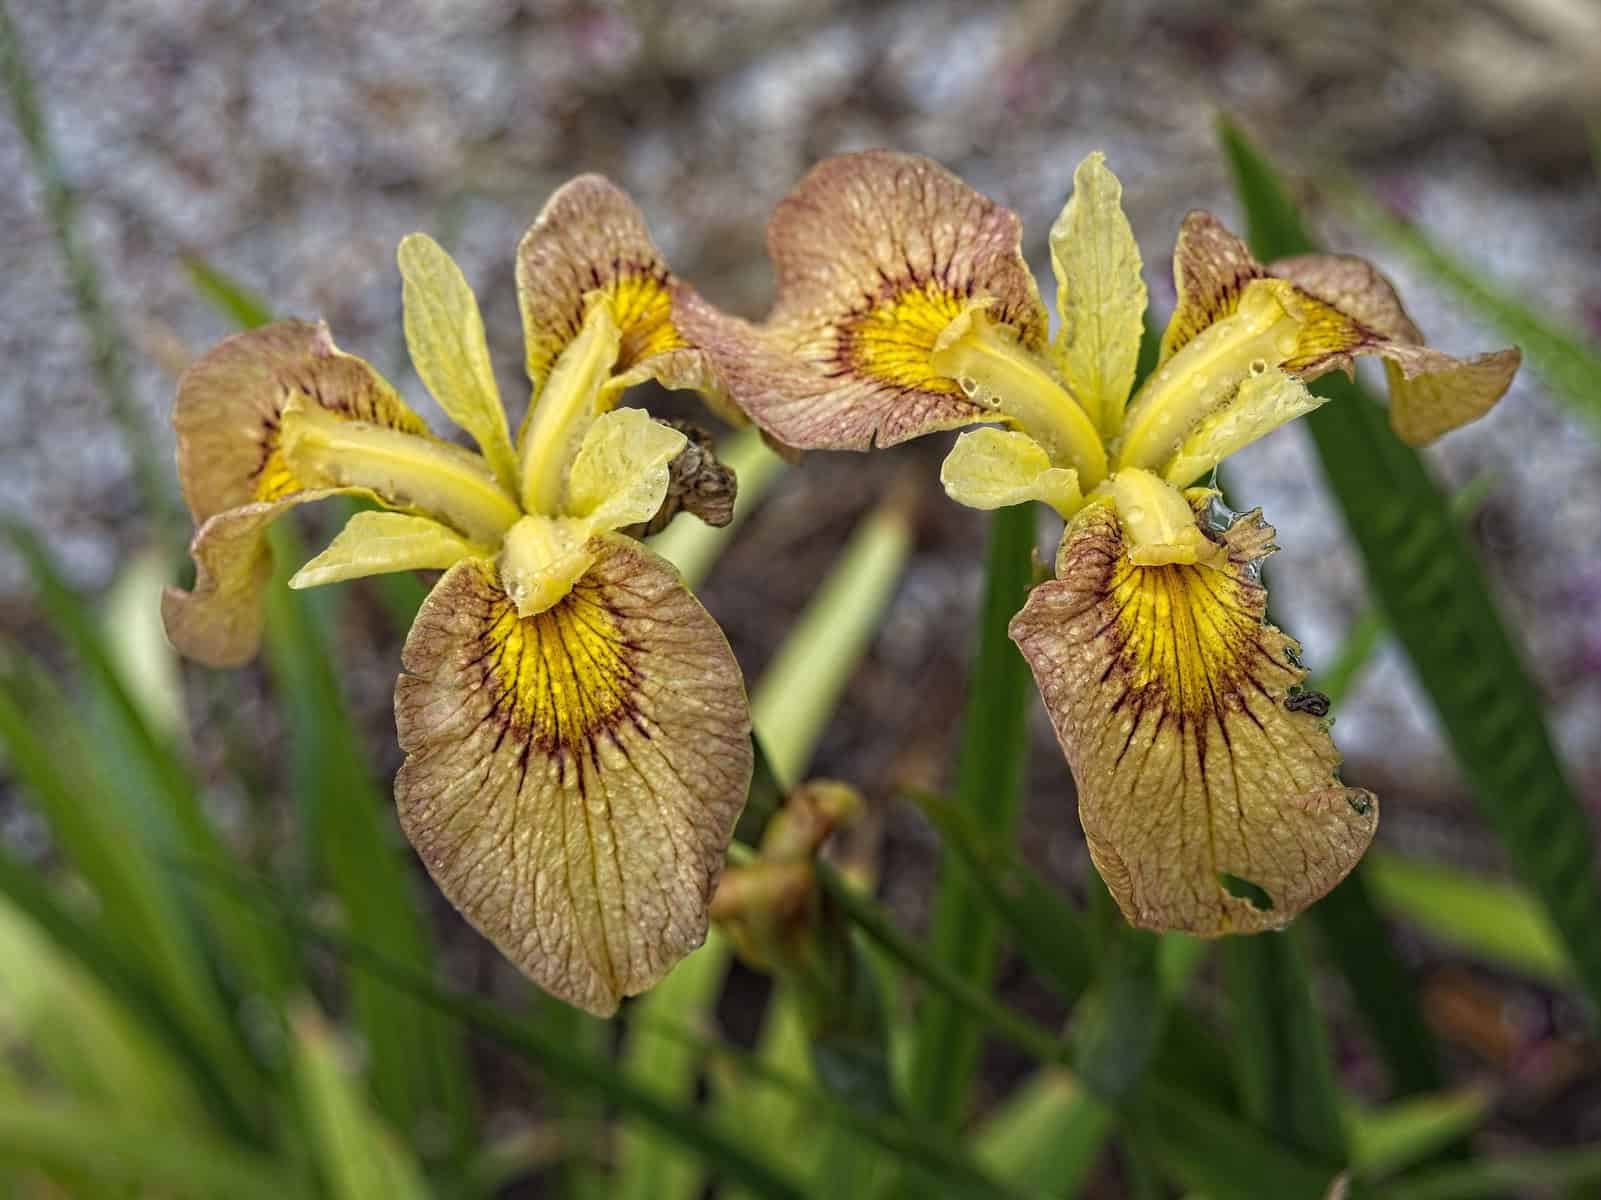 Close-up of two blooming yellow and brown irises with water droplets on the petals, nestled in a Chartreuse garden. The flowers have intricate patterns and are surrounded by green leaves and stems. The background is blurred, highlighting the details of the irises.